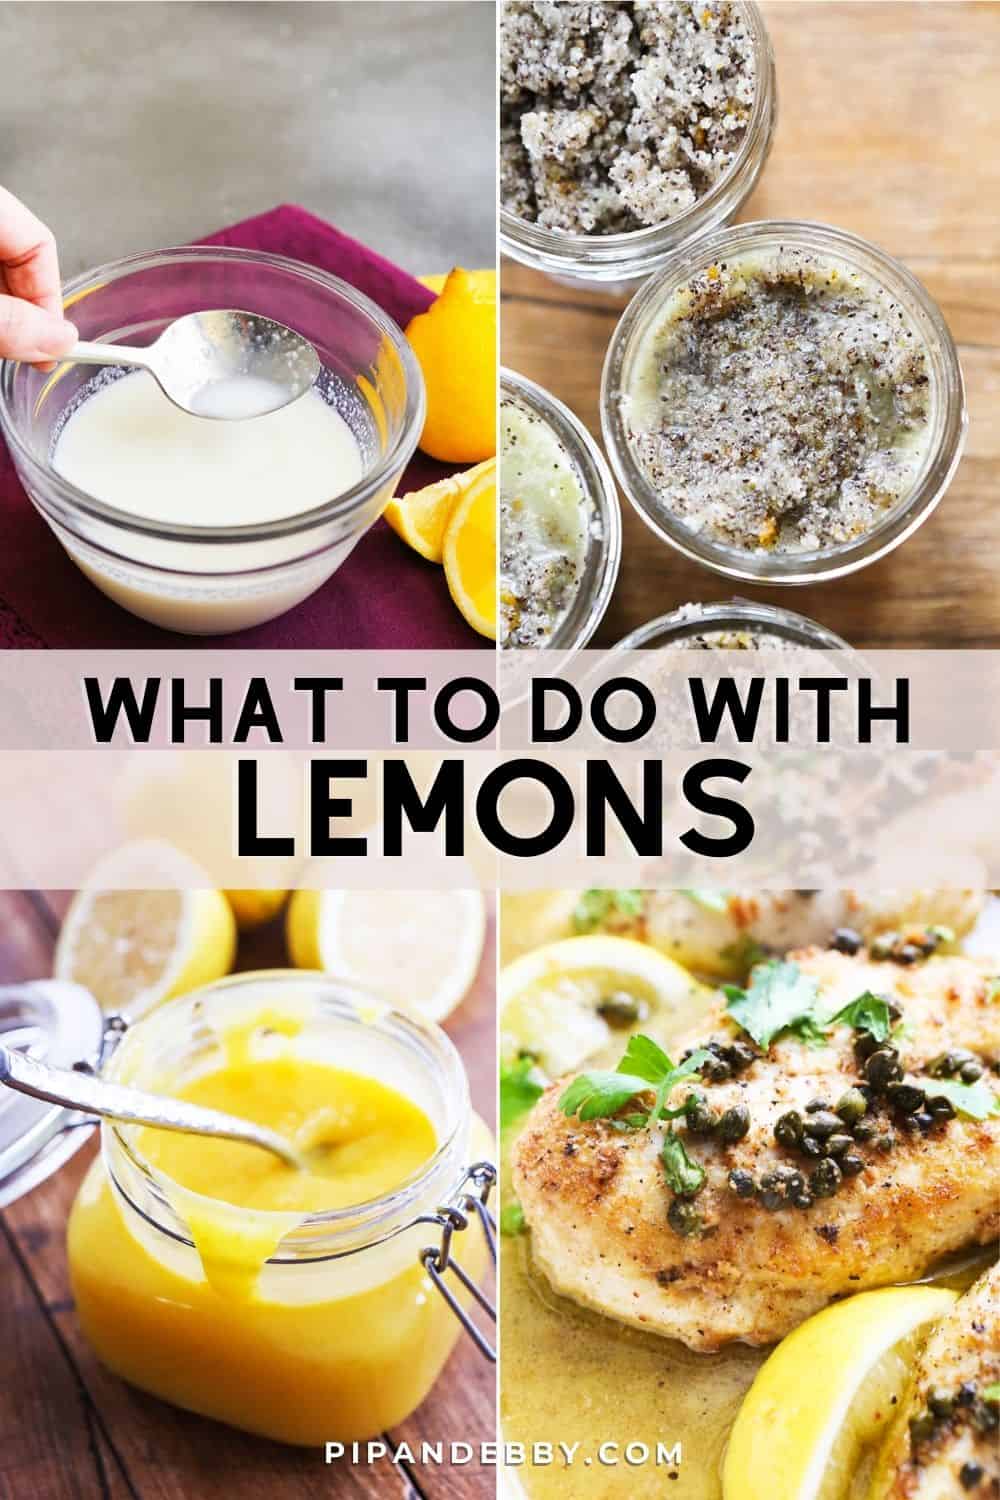 Four photos in a grid with text overlay reading, "What to do with lemons."